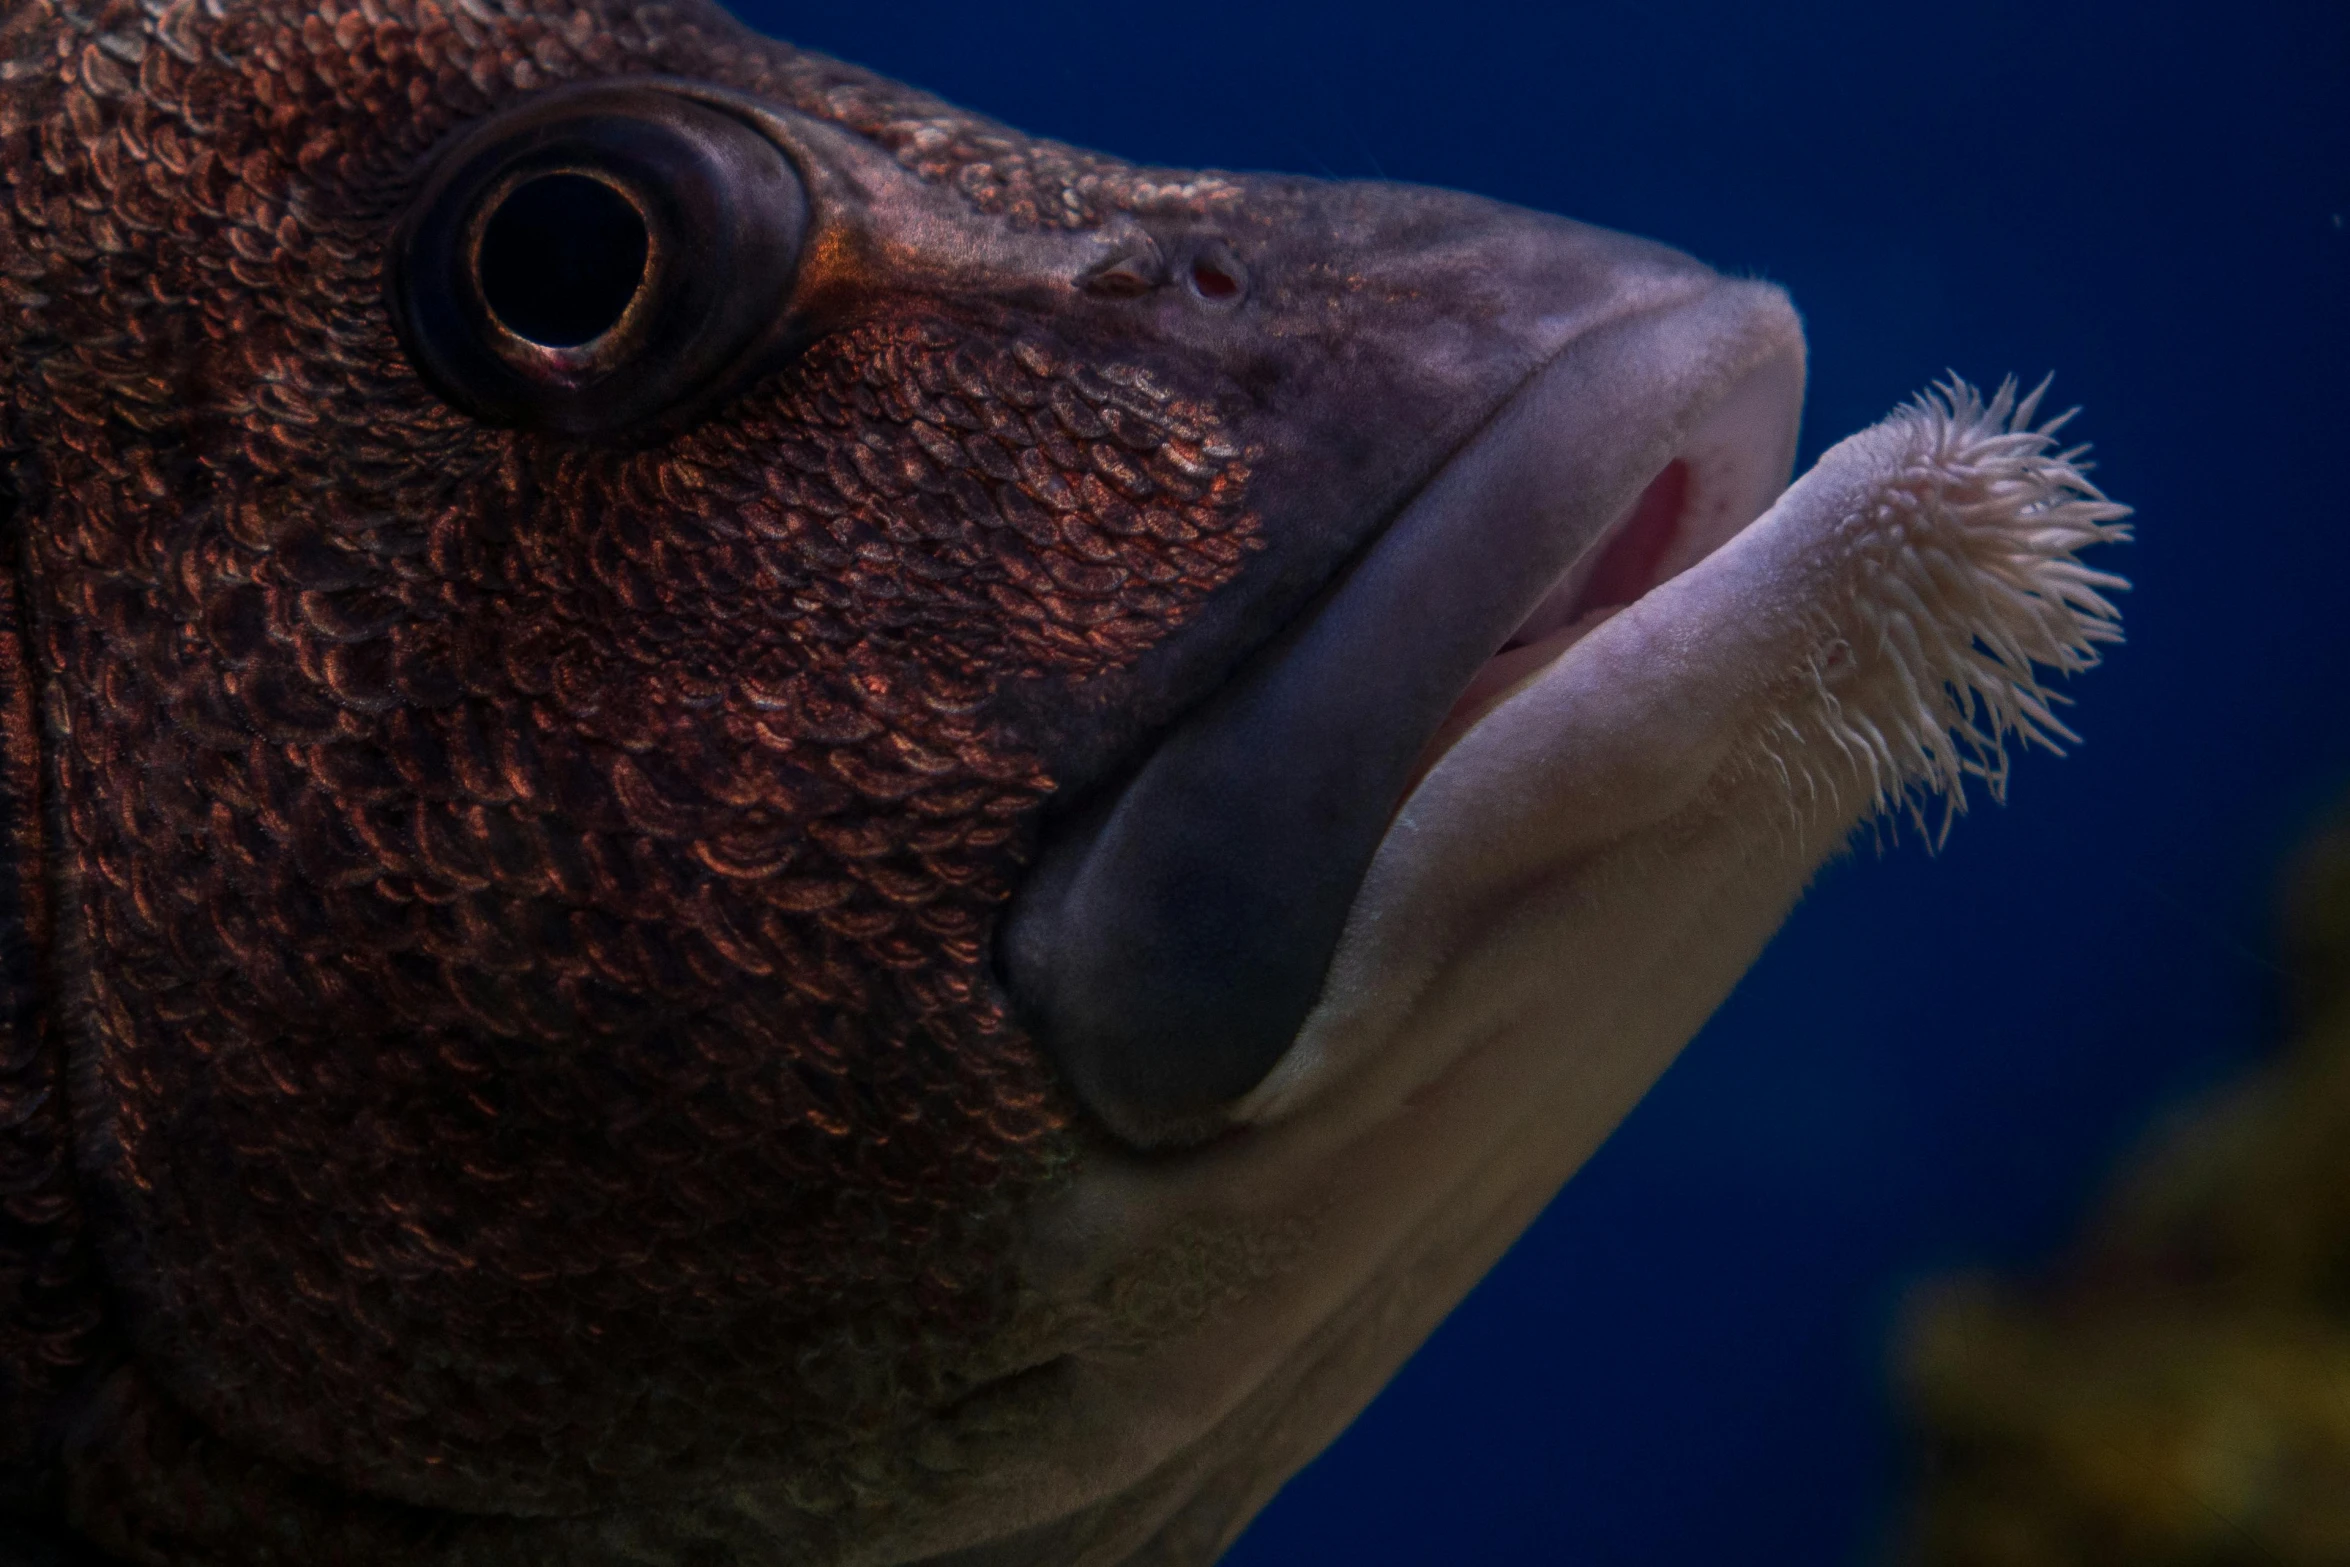 an image of a close up of a fish